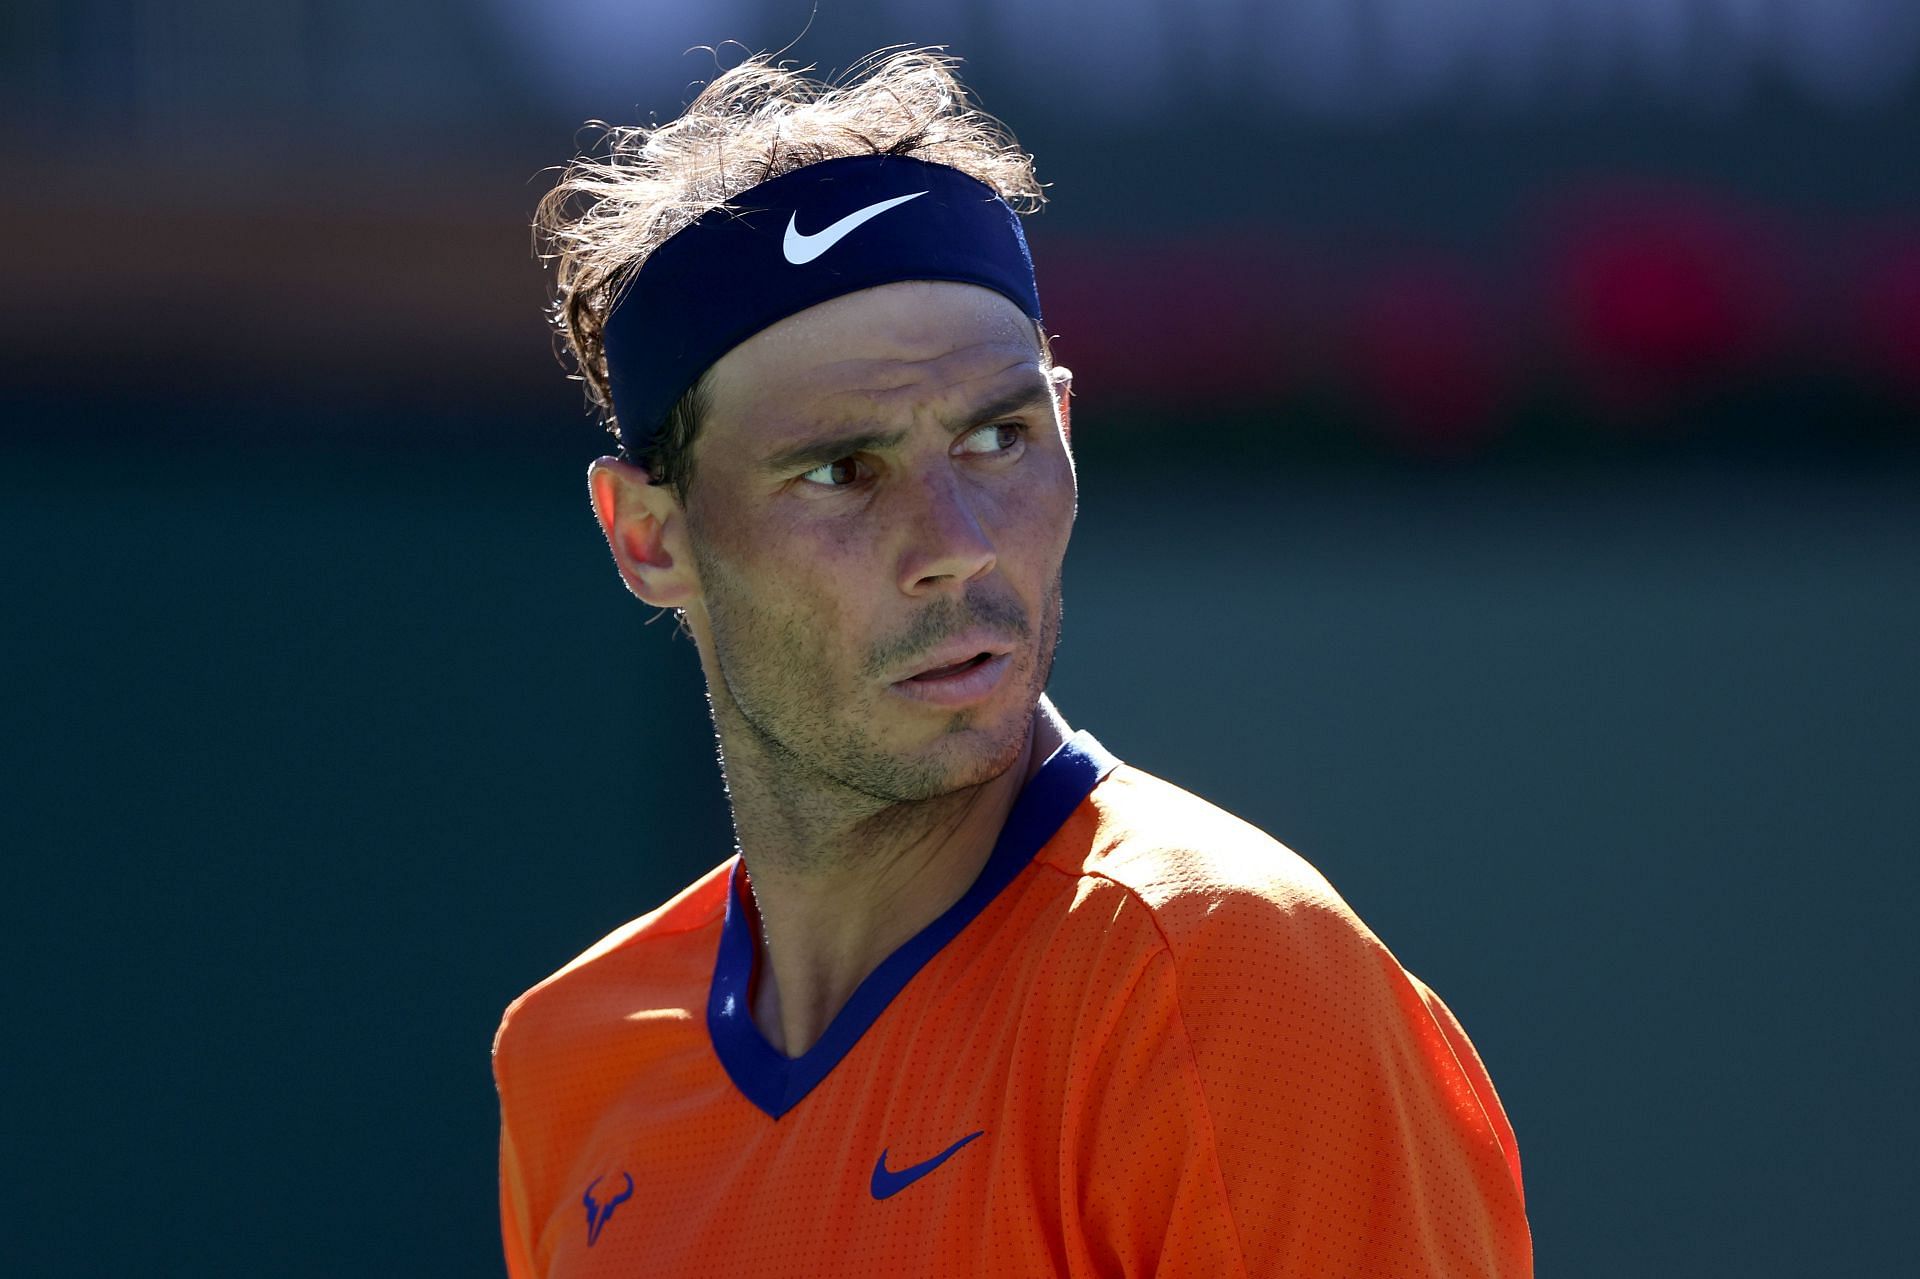 Rafael Nadal takes on Dan Evans in the third round of the 2022 Indian Wells Masters